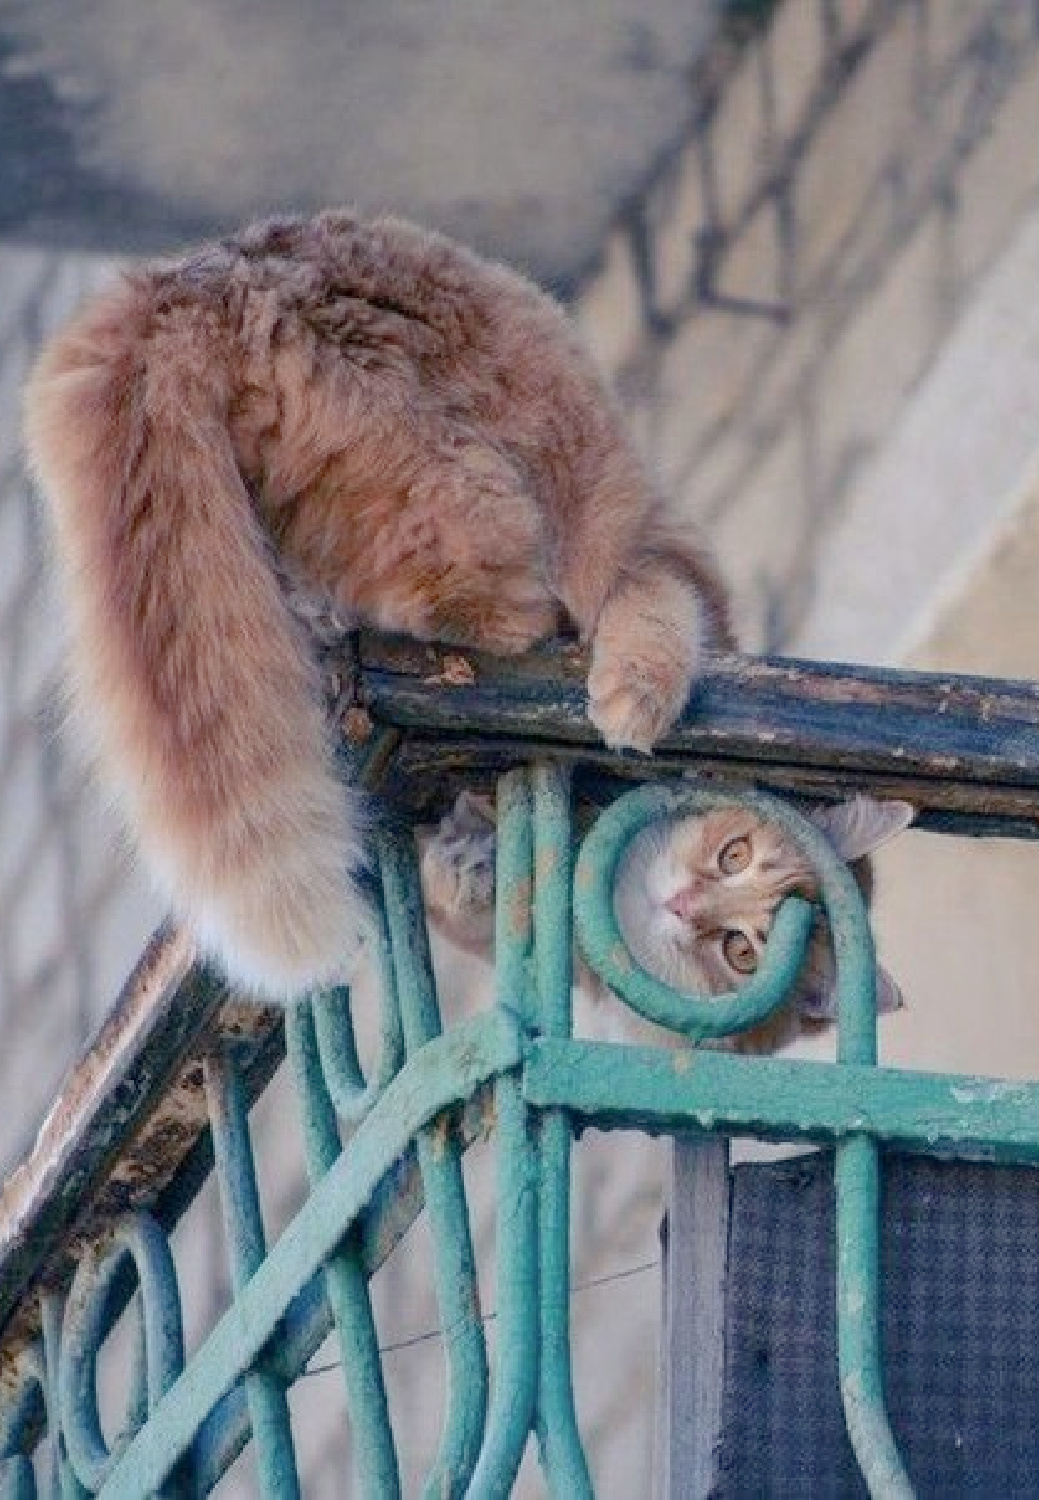 Ginger cat peeking through a turquoise painted metal balcony - Amellye. #turquoise